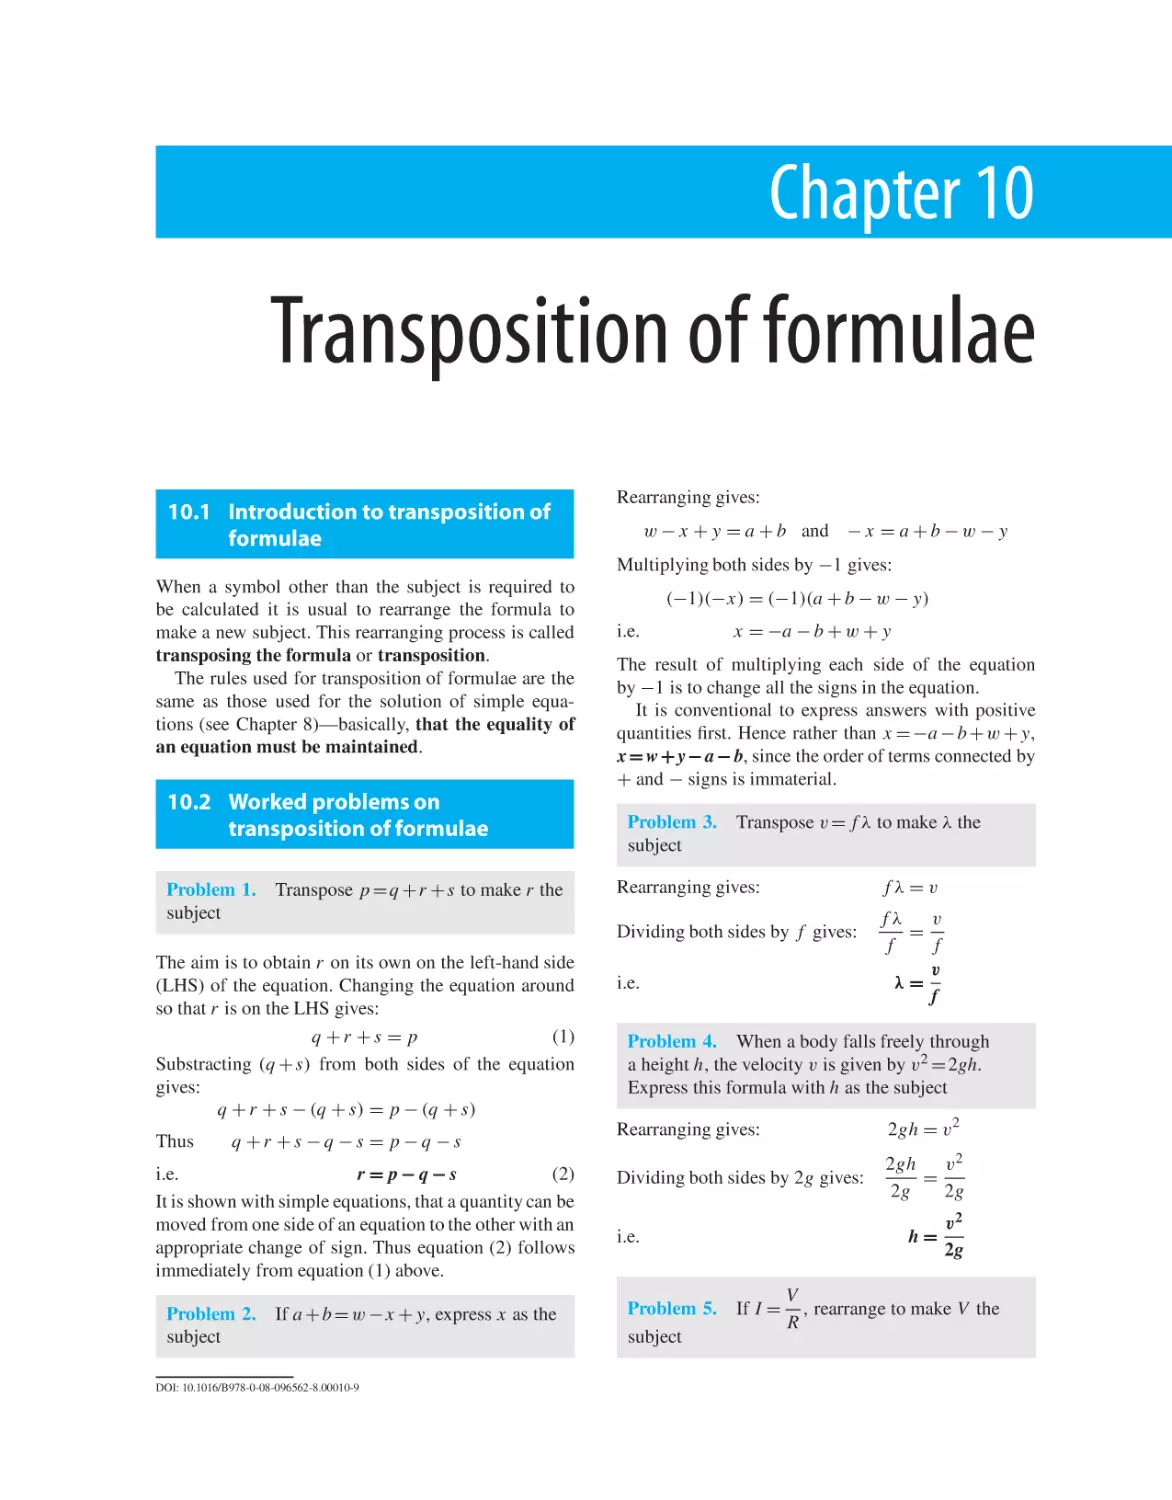 Chapter 10. Transposition of formulae
10.1 Introduction to transposition of formulae
10.2 Worked problems on transposition of formulae